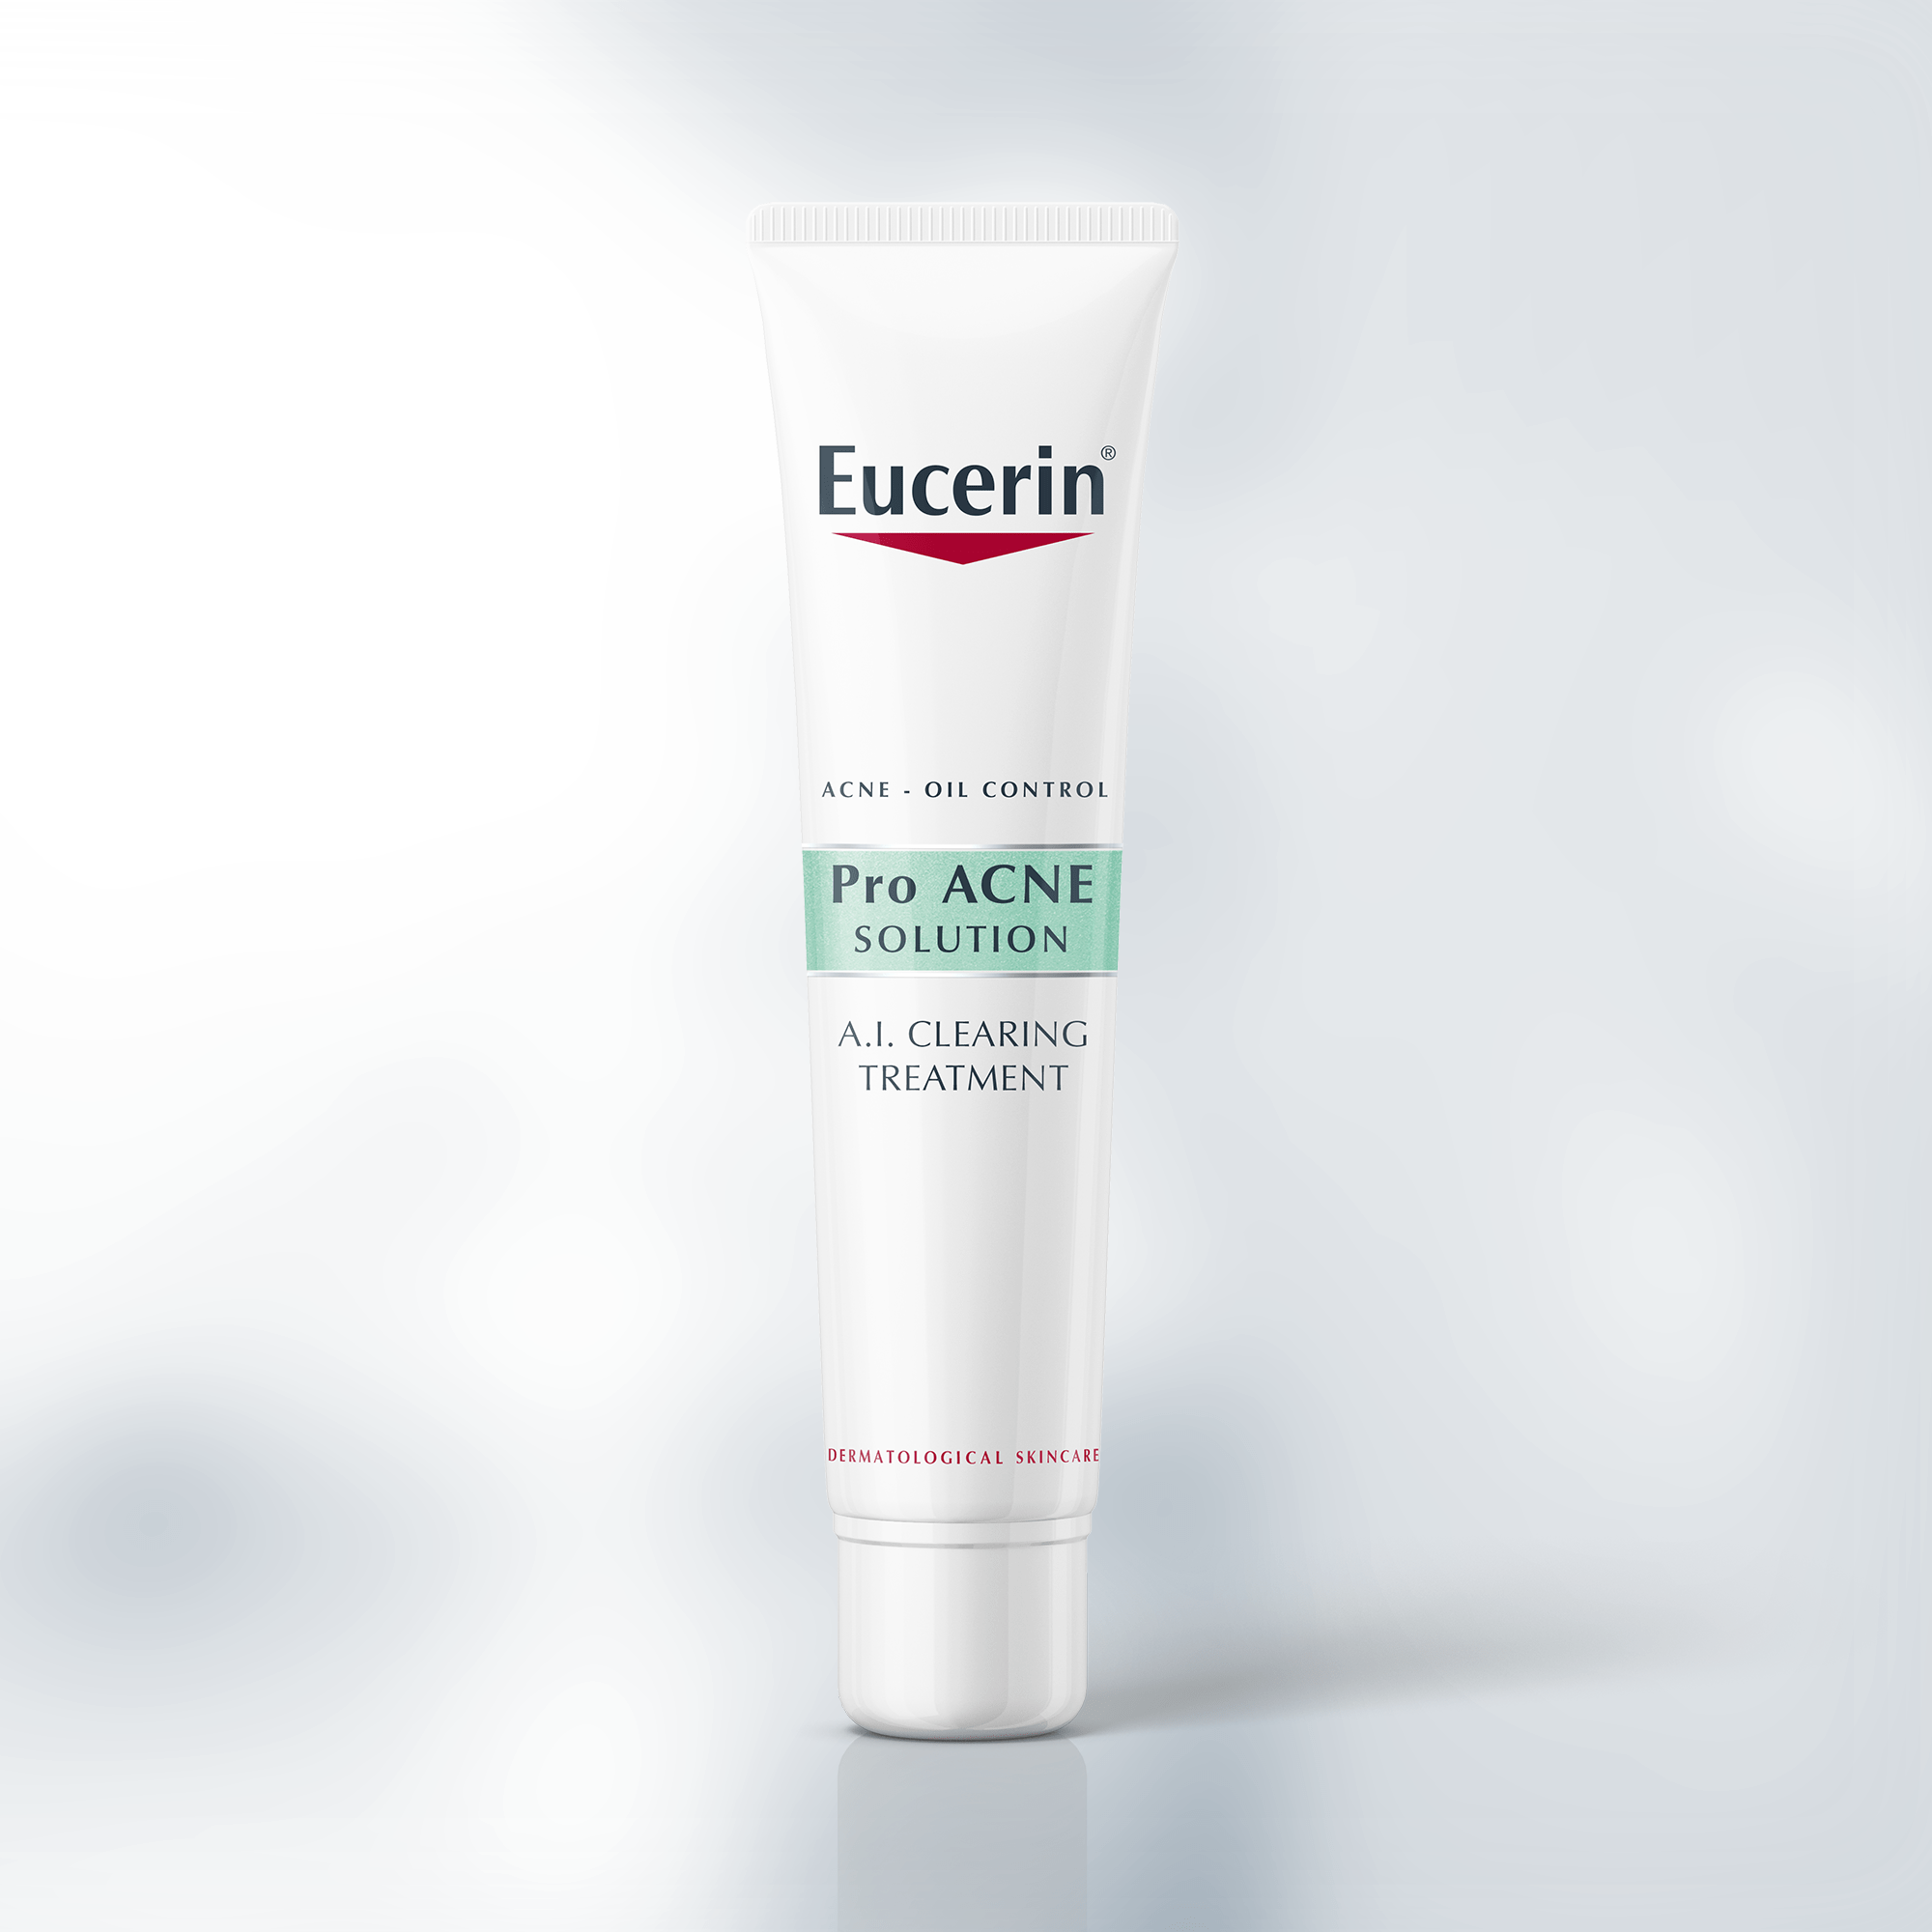 Eucerin ProAcne Solution | A.I Clearing Treatment